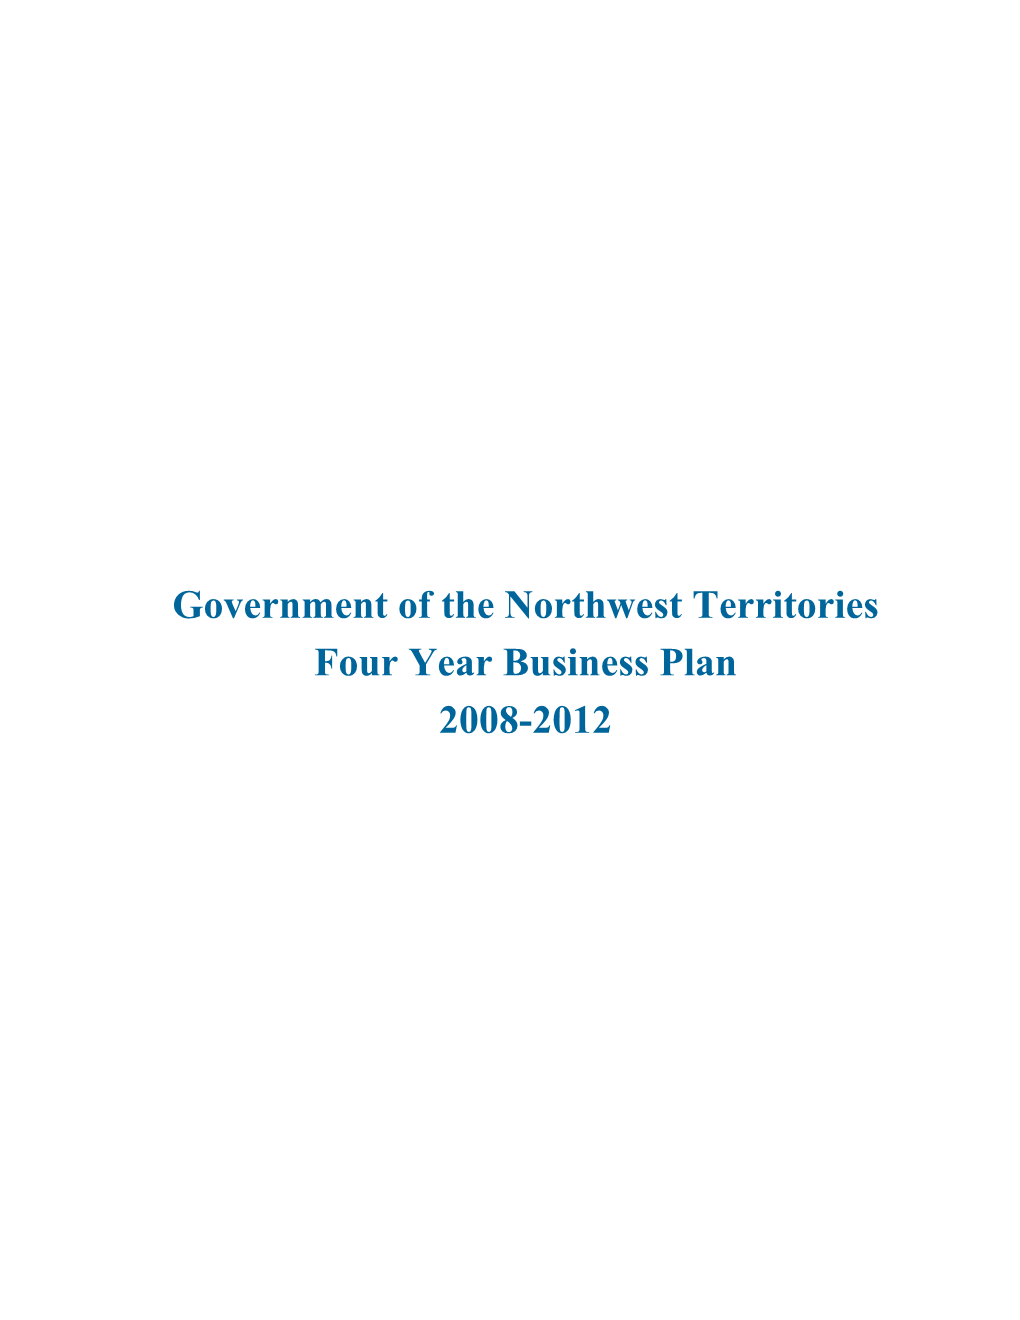 Government of the Northwest Territories Four Year Business Plan 2008-2012